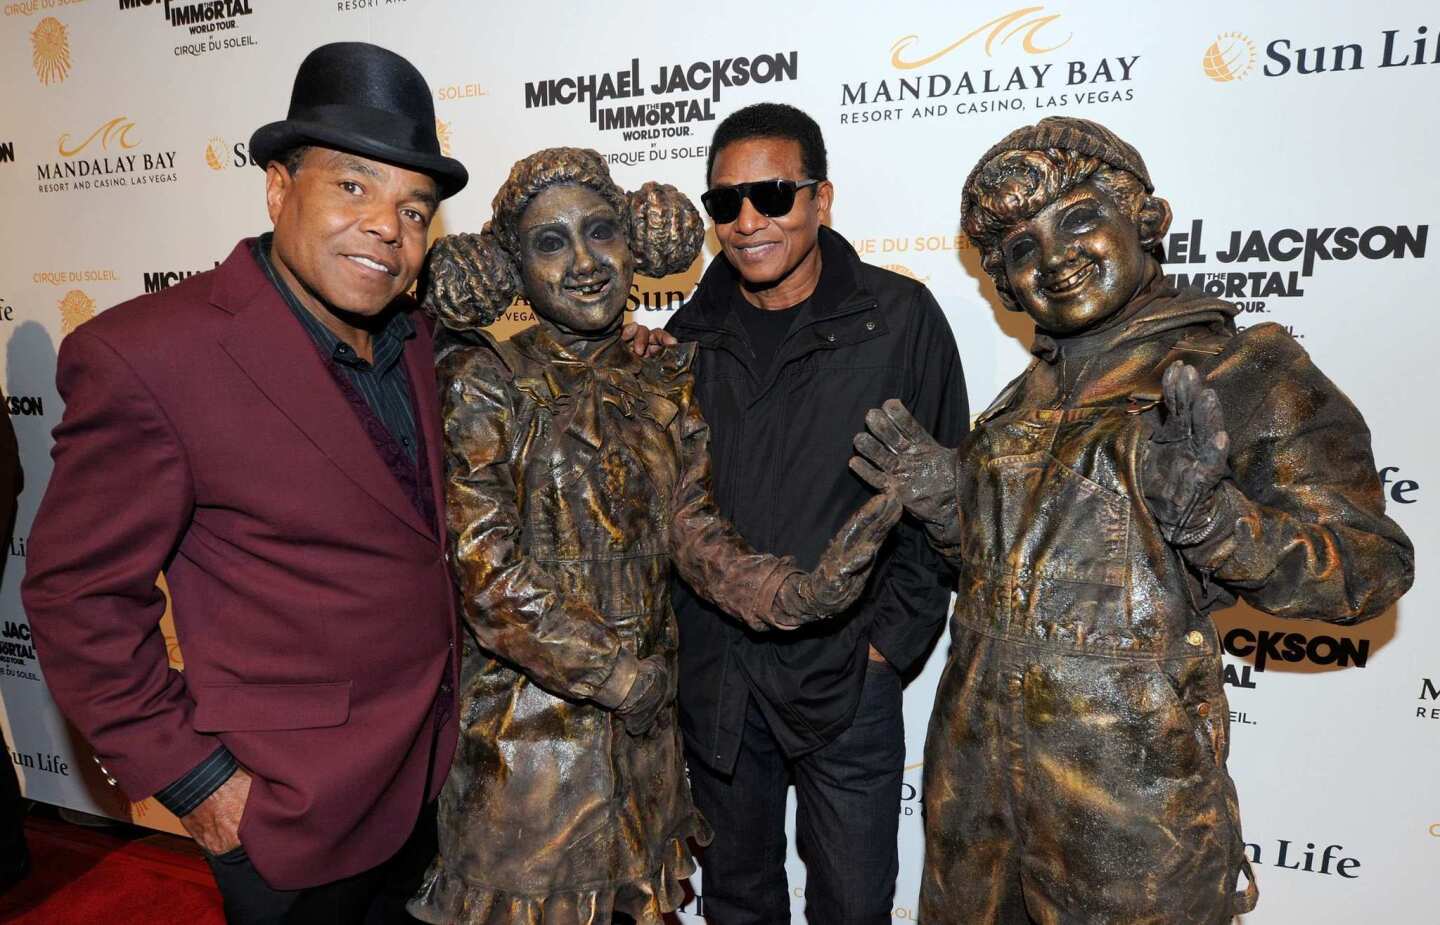 Tito Jackson and Jackie Jackson pose with Cirque du Soleil performers as they arrive at the Las Vegas premiere of "Immortal," Cirque du Soleil's tribute to Michael Jackson at the Mandalay Bay Resort and Casino. The show featuring the collected work of Michael Jackson will be performed through Dec. 27. After a world tour, it will set up a permanent home in Vegas in 2013.